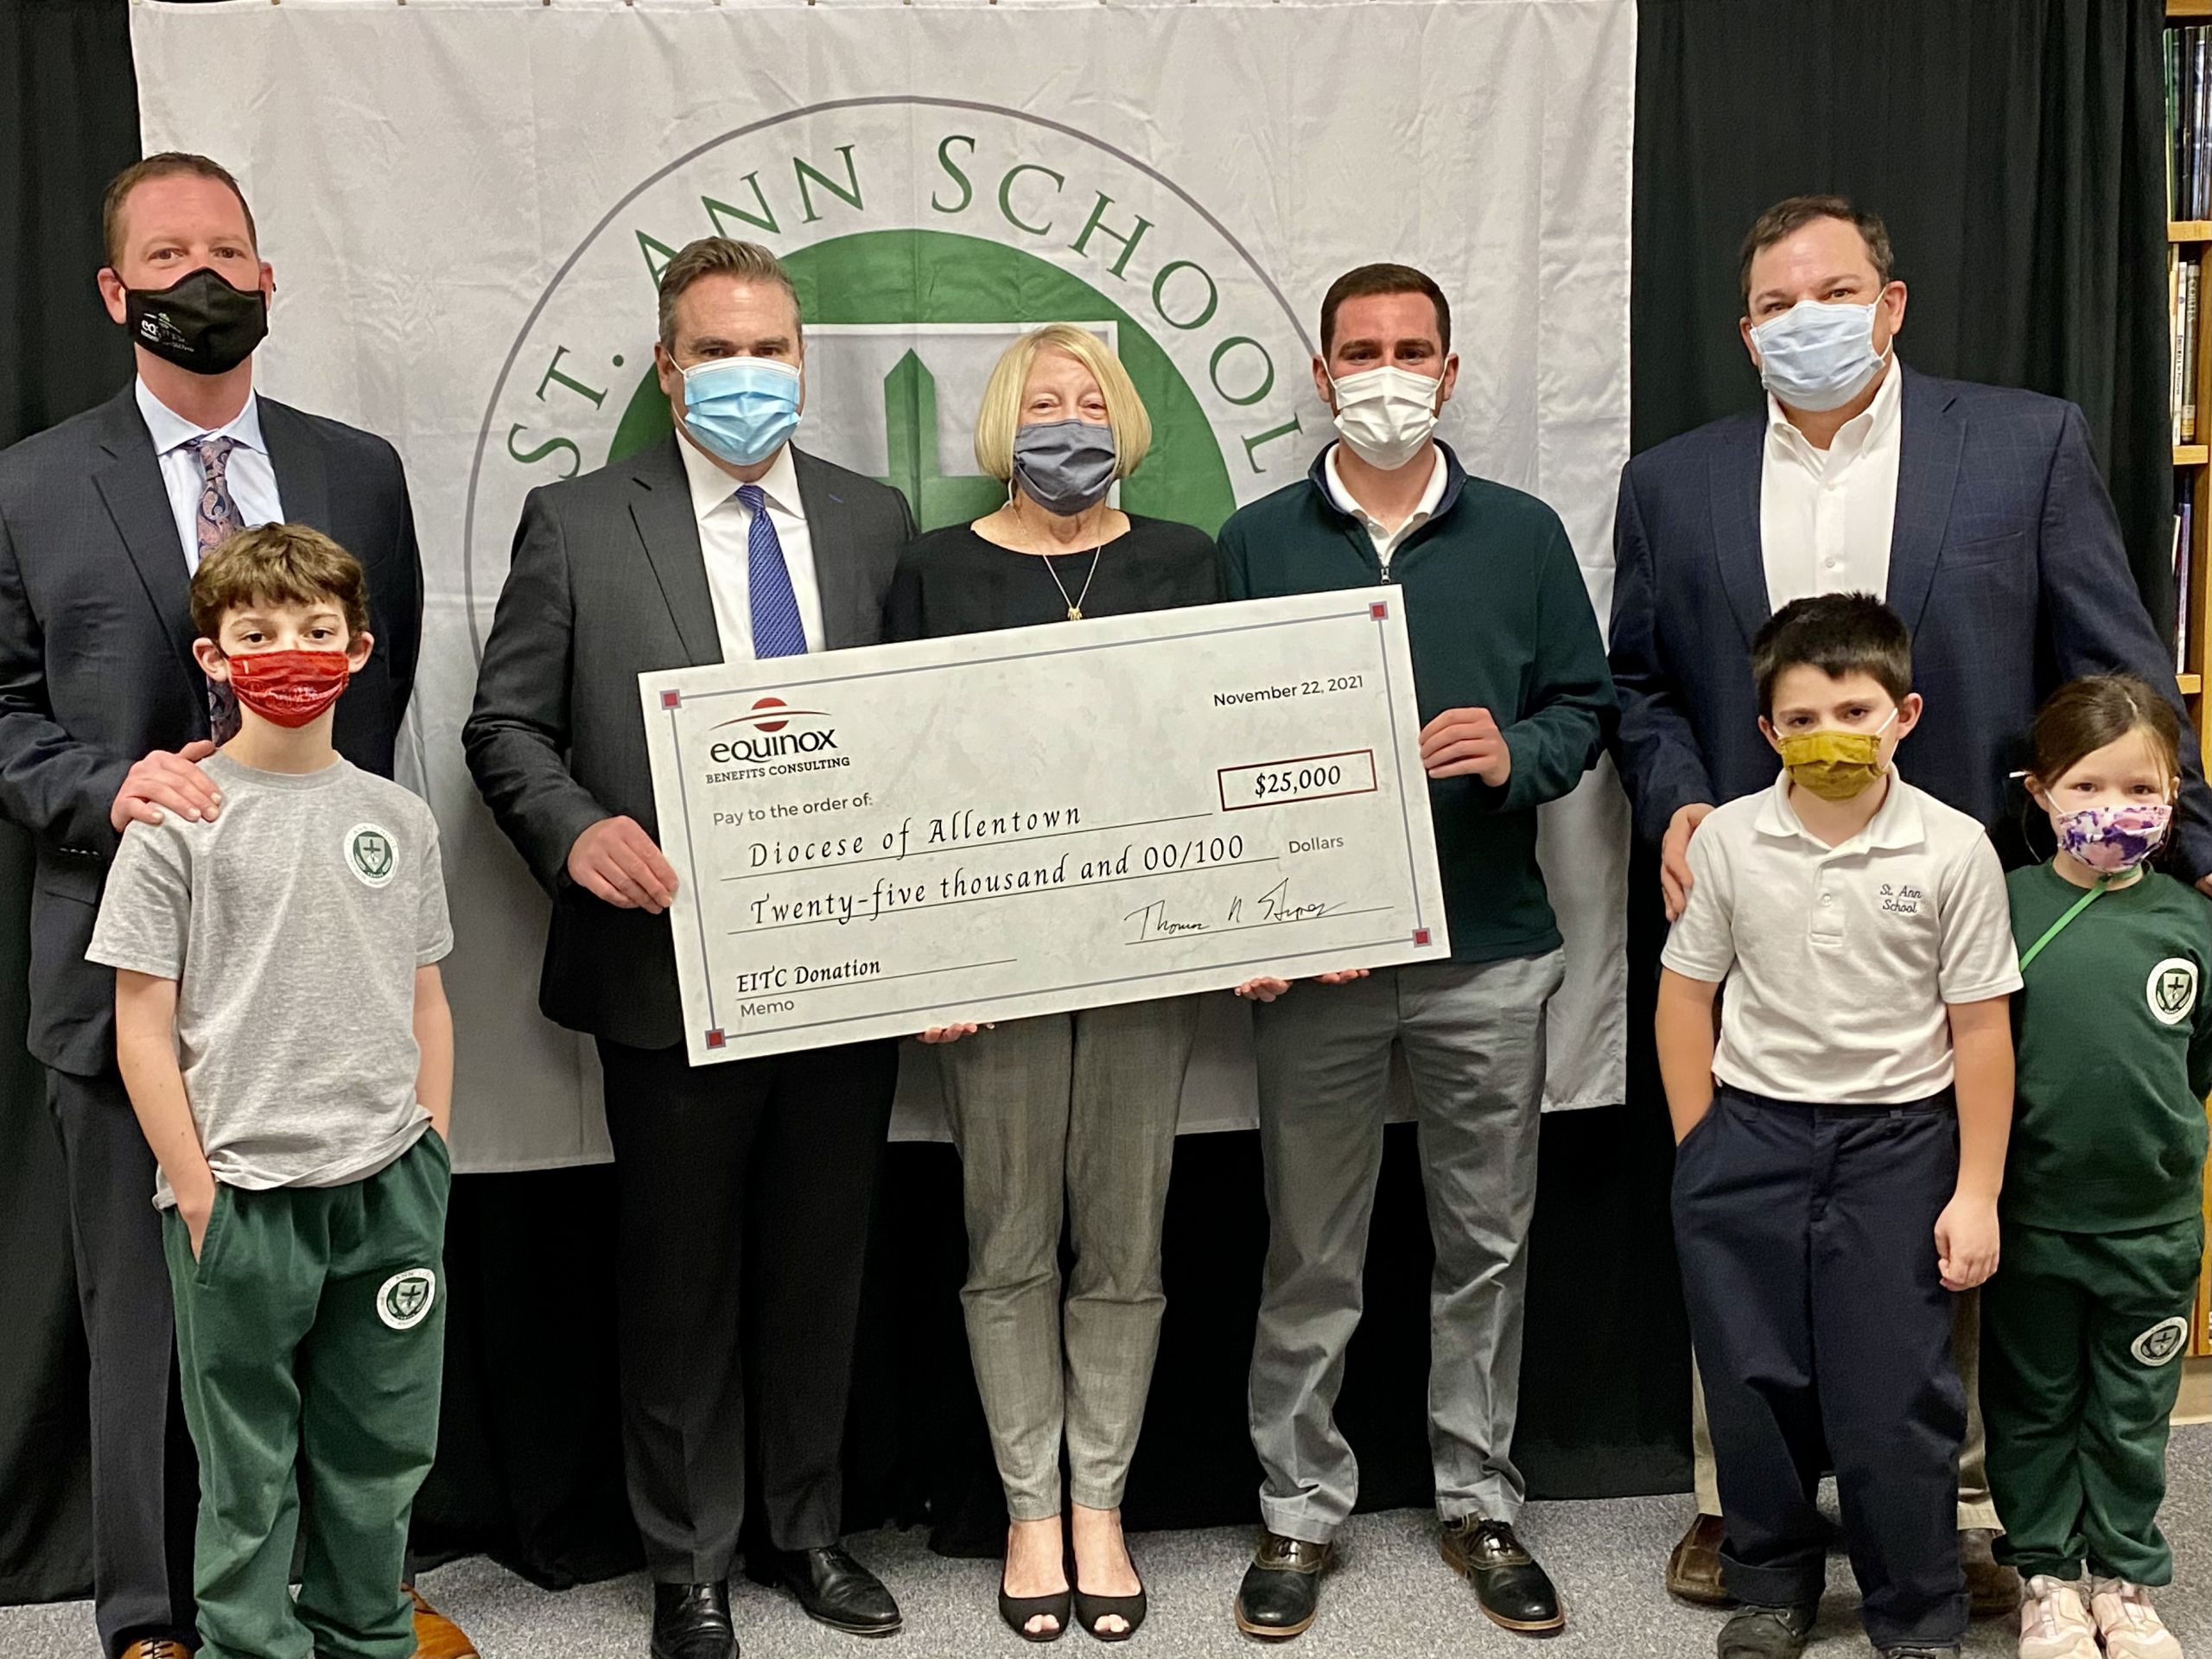 Tom Groves Presenting the scholarship donation with Equinox's Employees and their children that attend St Ann's School. (Named in order from left to right) Equinox's Benefits Consultant: Nick Maxell and his son Mason Maxell, Tom Groves, St Ann's Principle: Diana Kile, Allentown Diocese Director of Scholarships: John Fierro, Equinox's Director of Client Engagement: Adam Ulicny and his son Luke and his daughter Lilyana Ulicny.